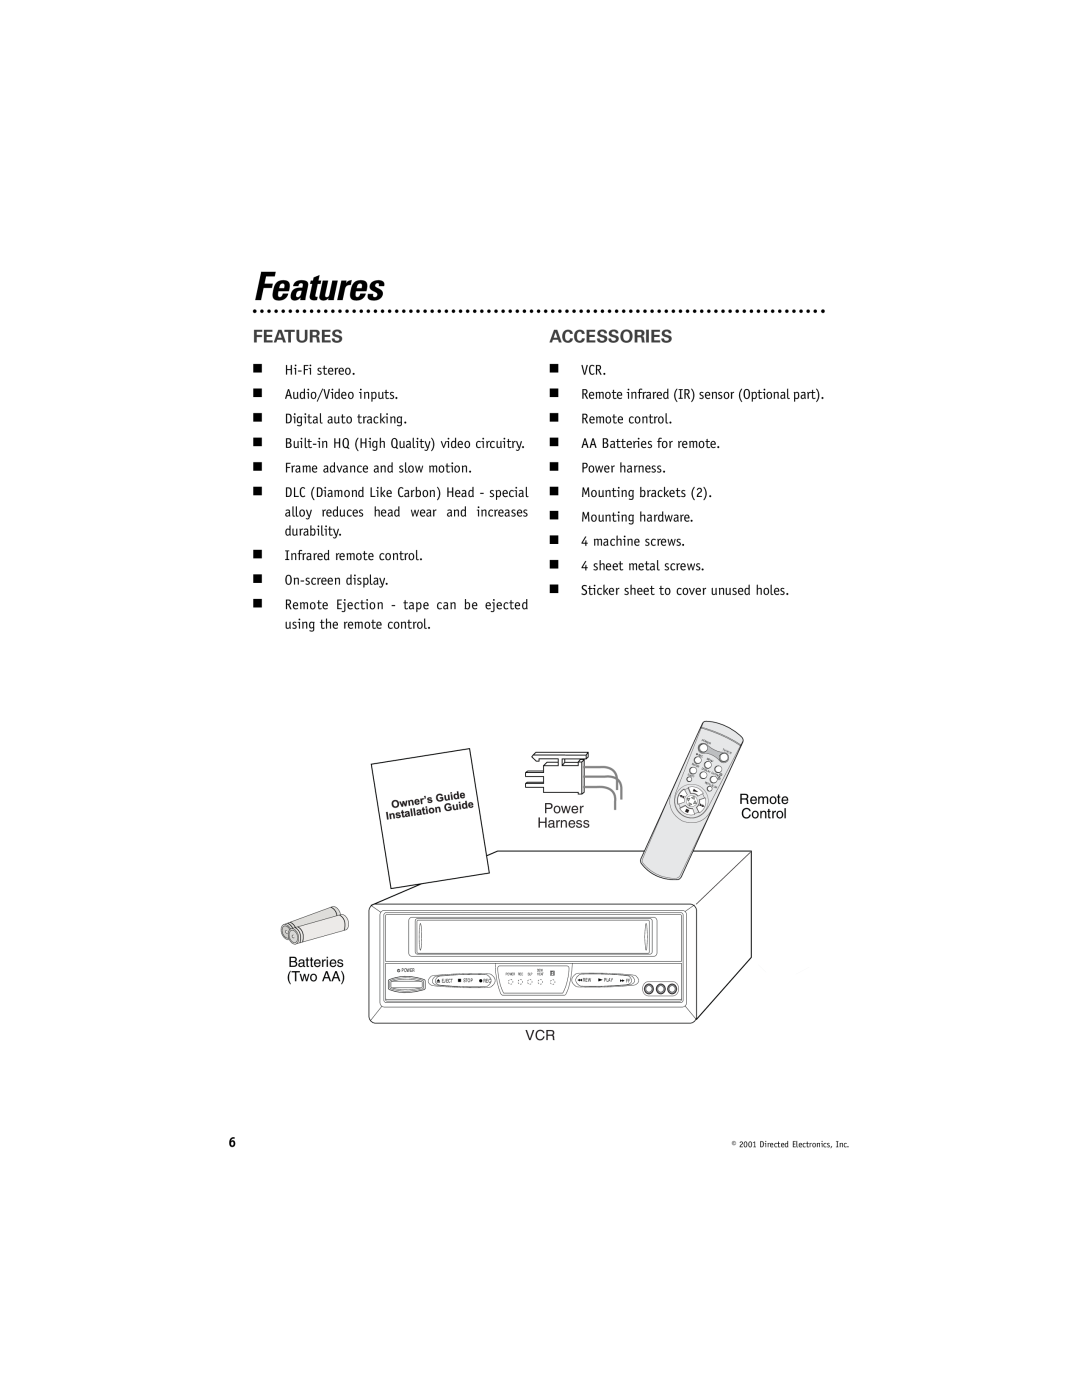 Directed Electronics VC2010 manual Features, Accessories 